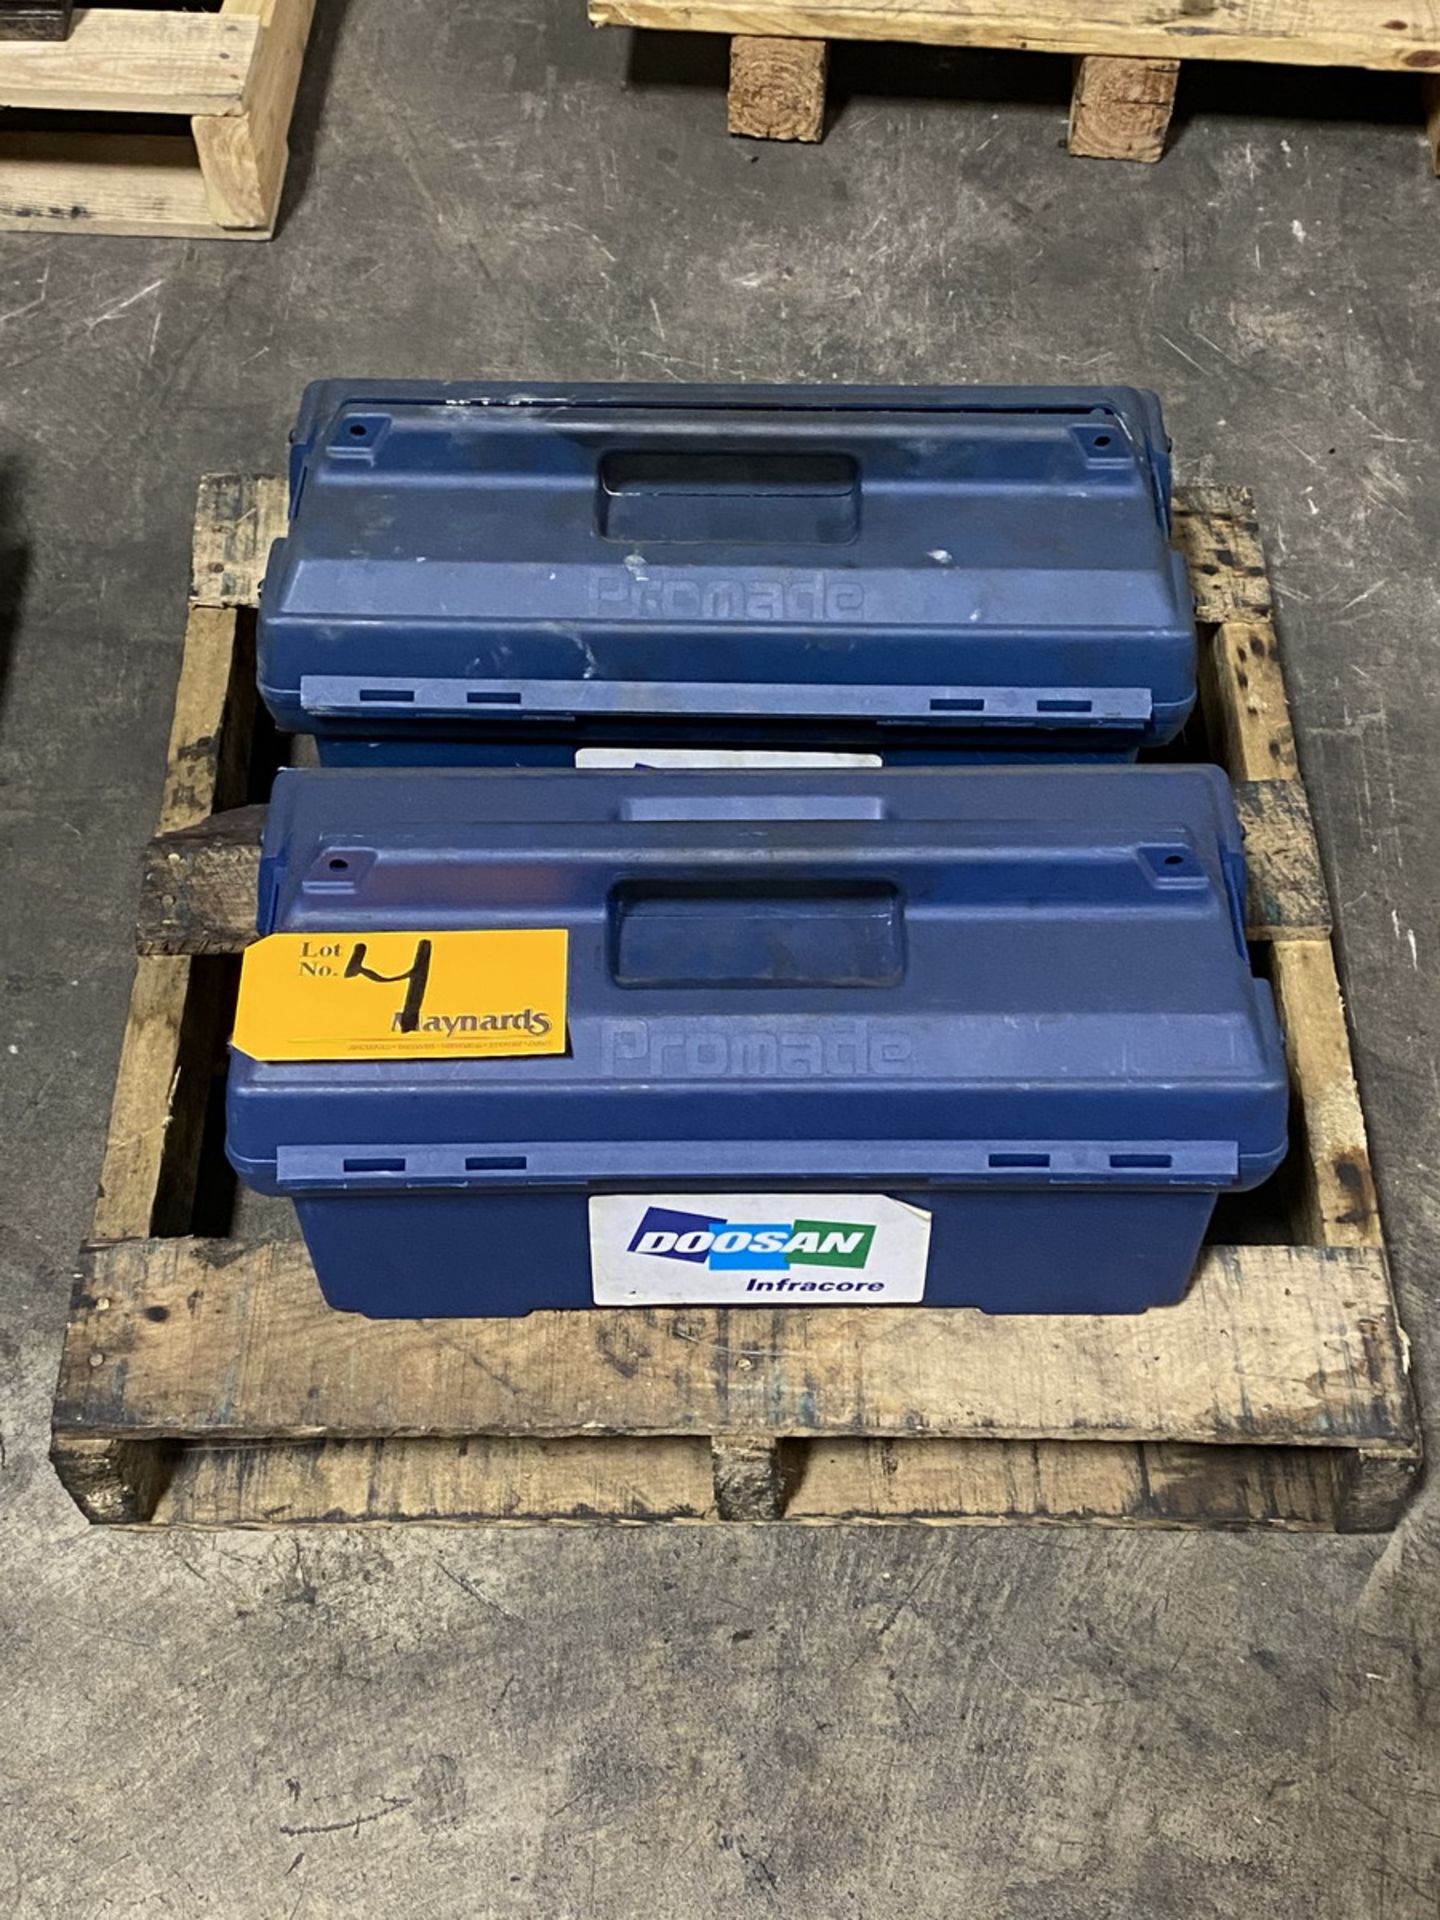 Promade Toolboxes 17'' x 7''